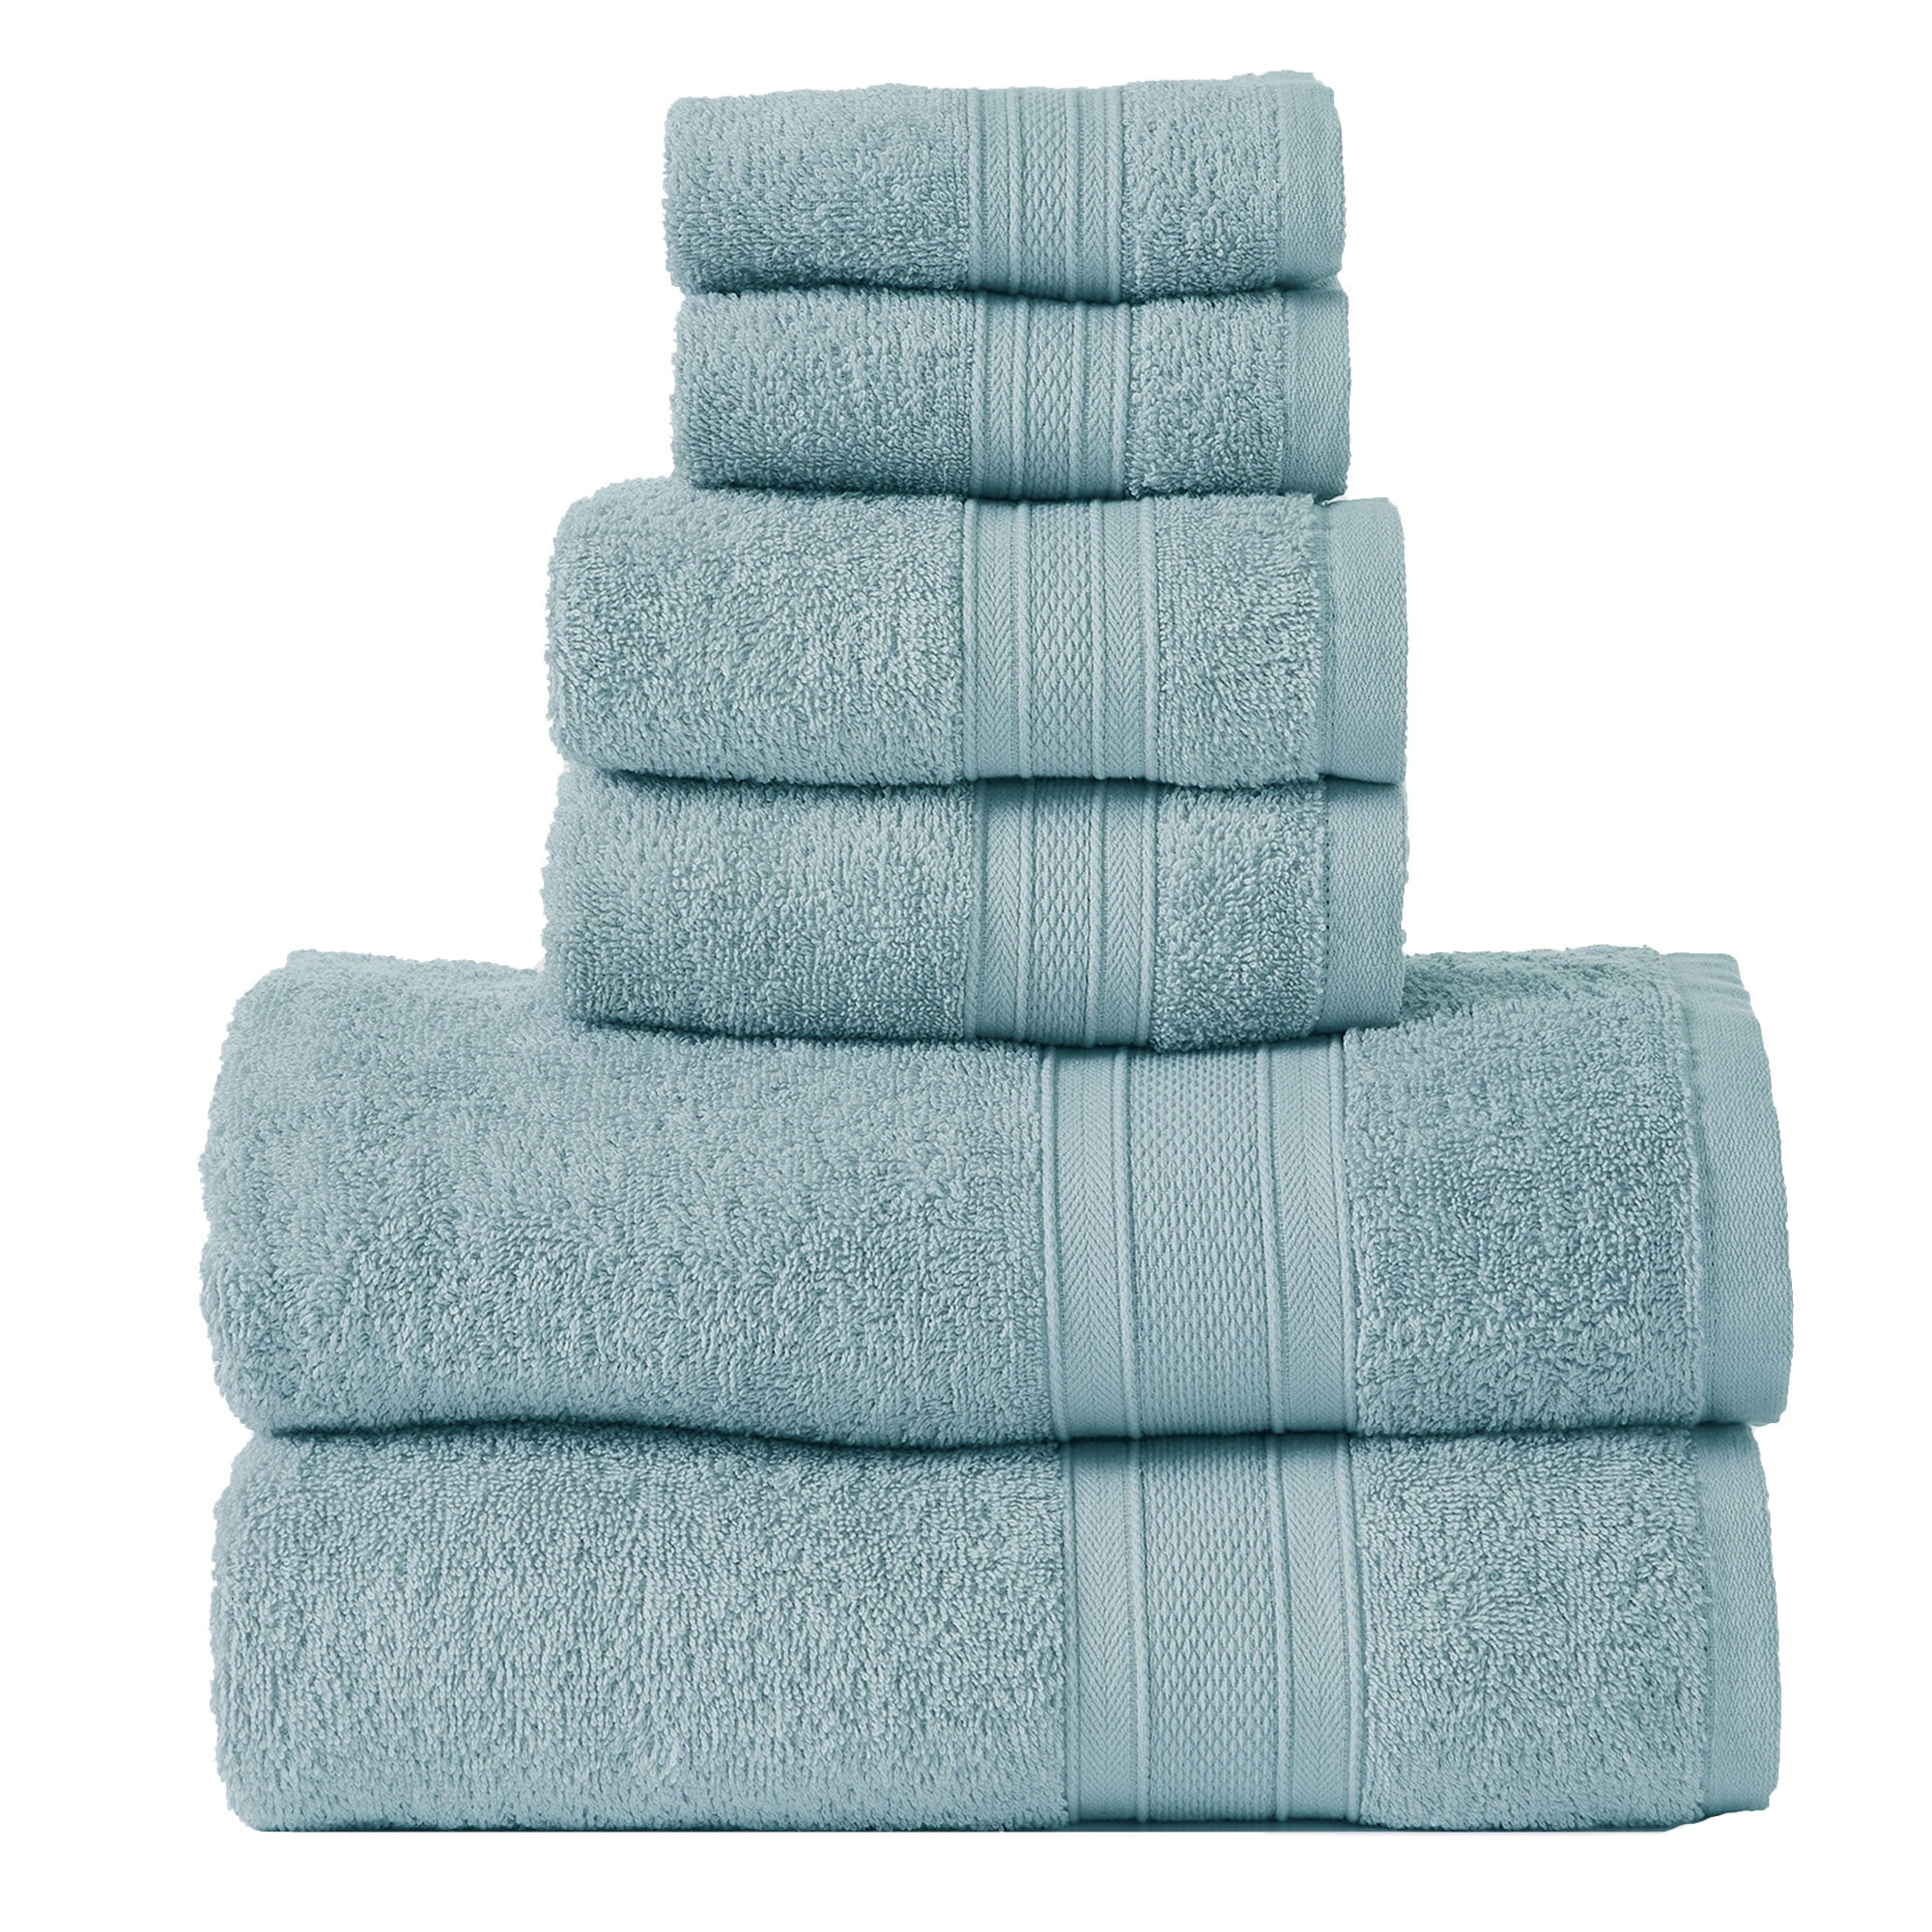 kitchen,Sports Non-disposable 100% Cotton Hand Towels for Face Care Bathroom 